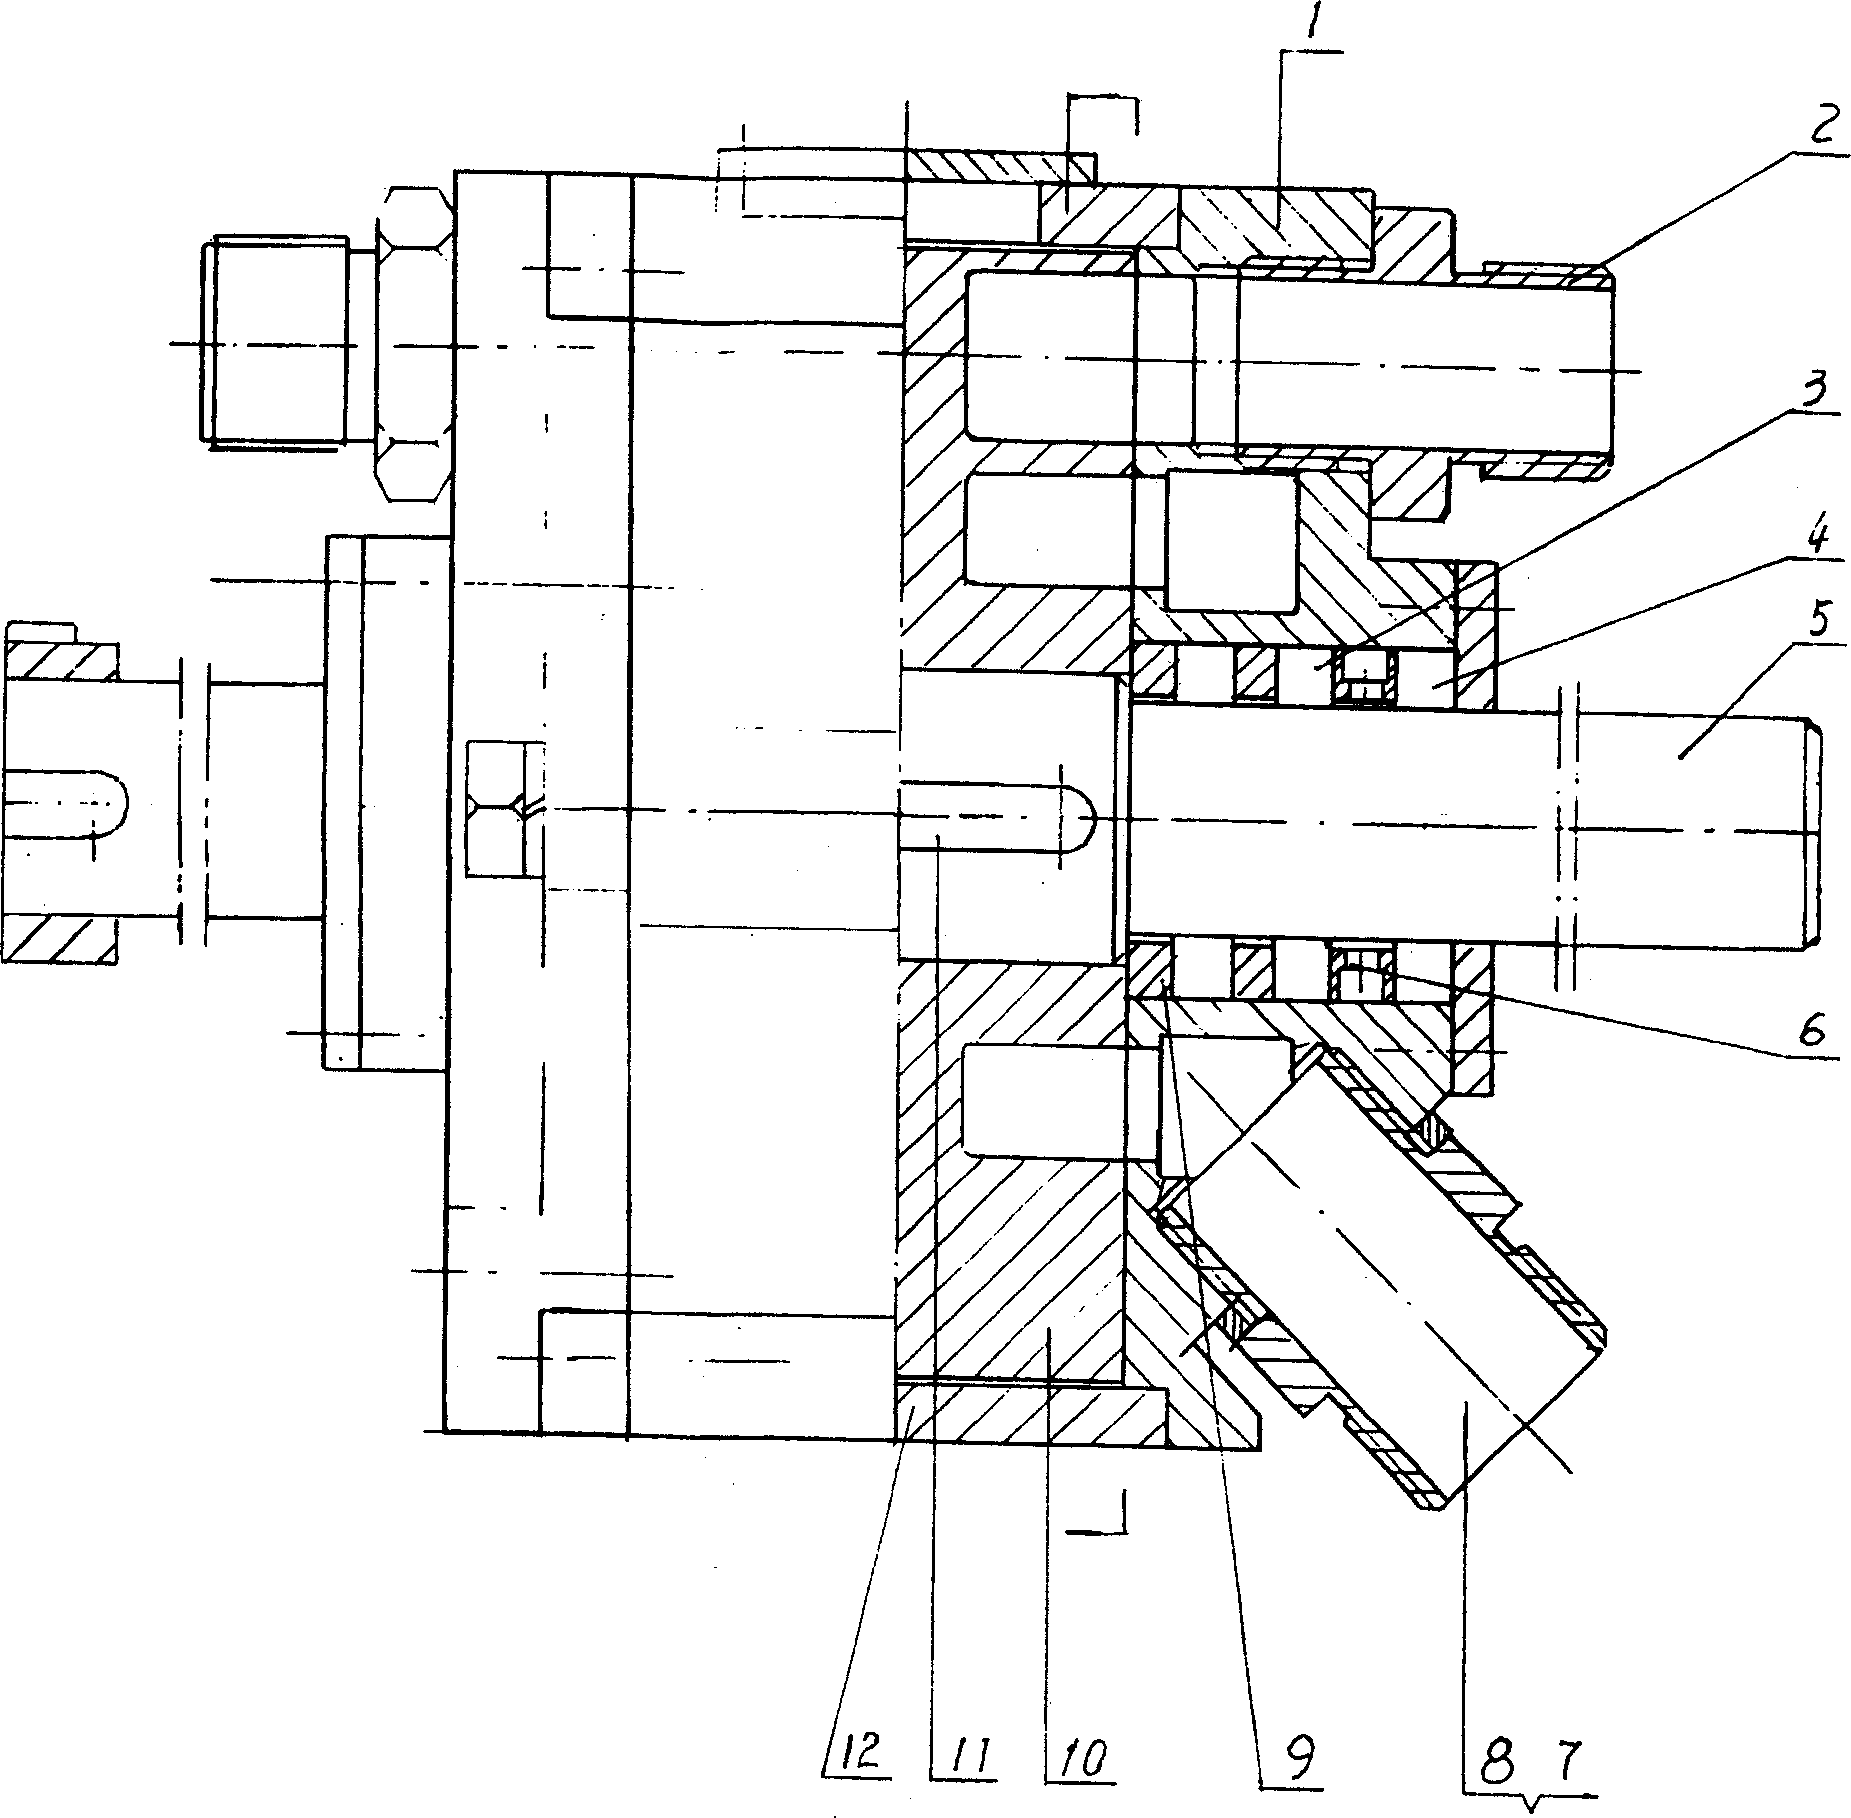 Air admission and fuel supplying system for gas engine